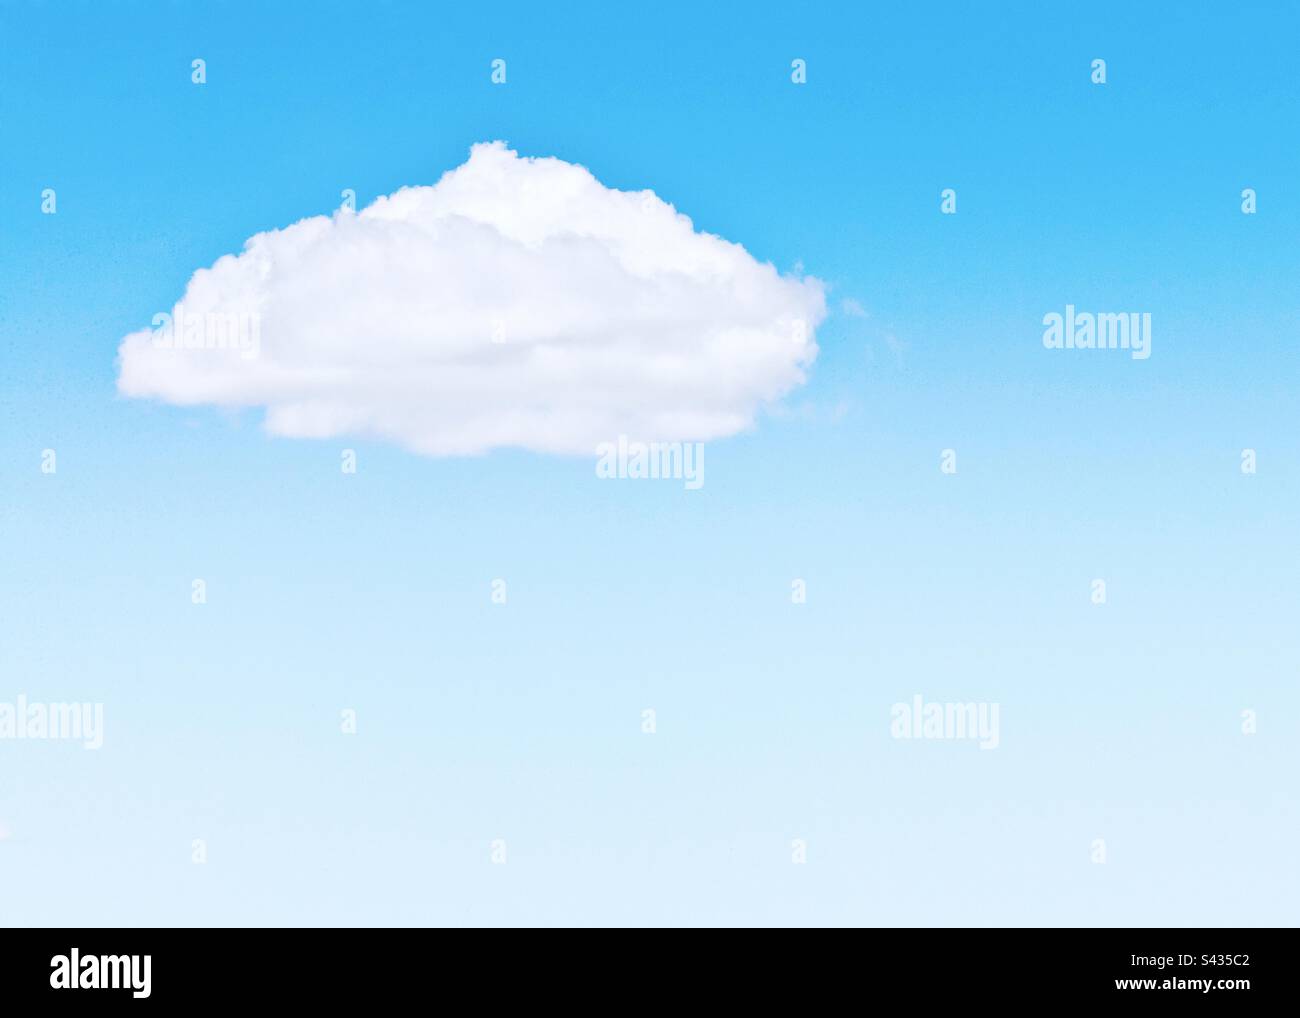 Clear blue sky with a single white fluffy cloud Stock Photo